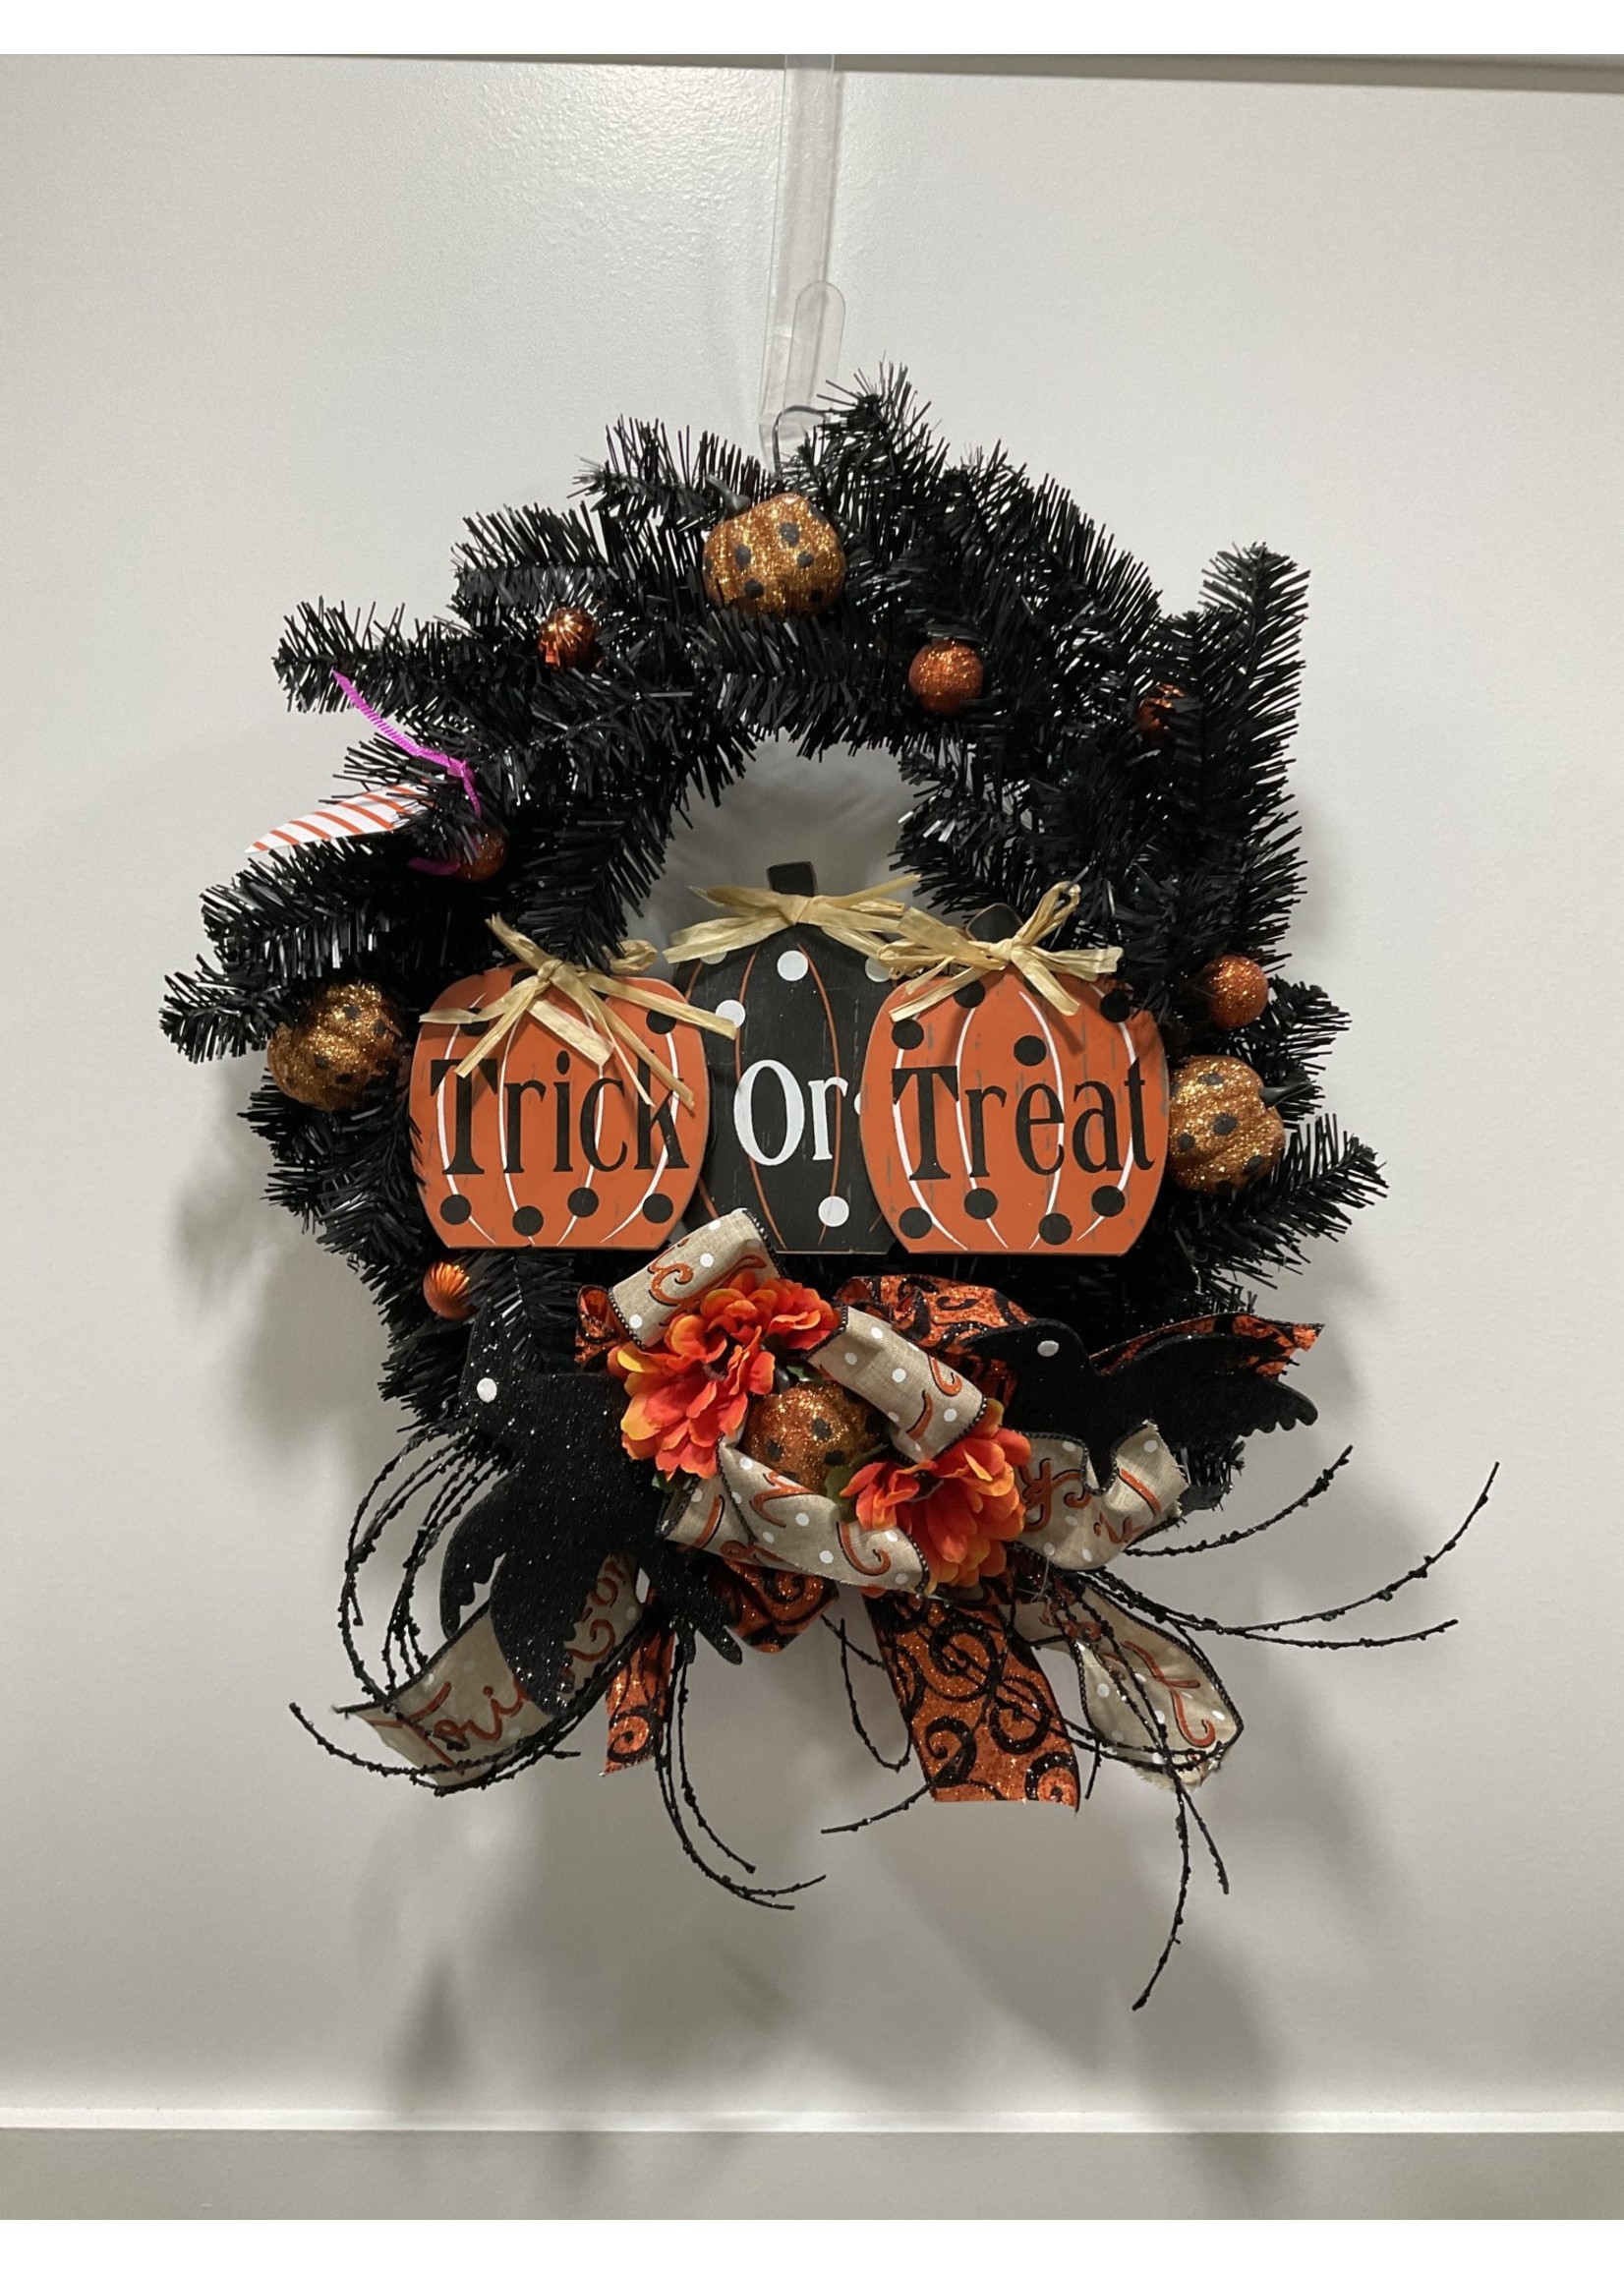 My New Favorite Thing 1842 Wreath Evergreen Black 21 in-"Trick or Treat" w/Crow and Trick or Treat Ribbon